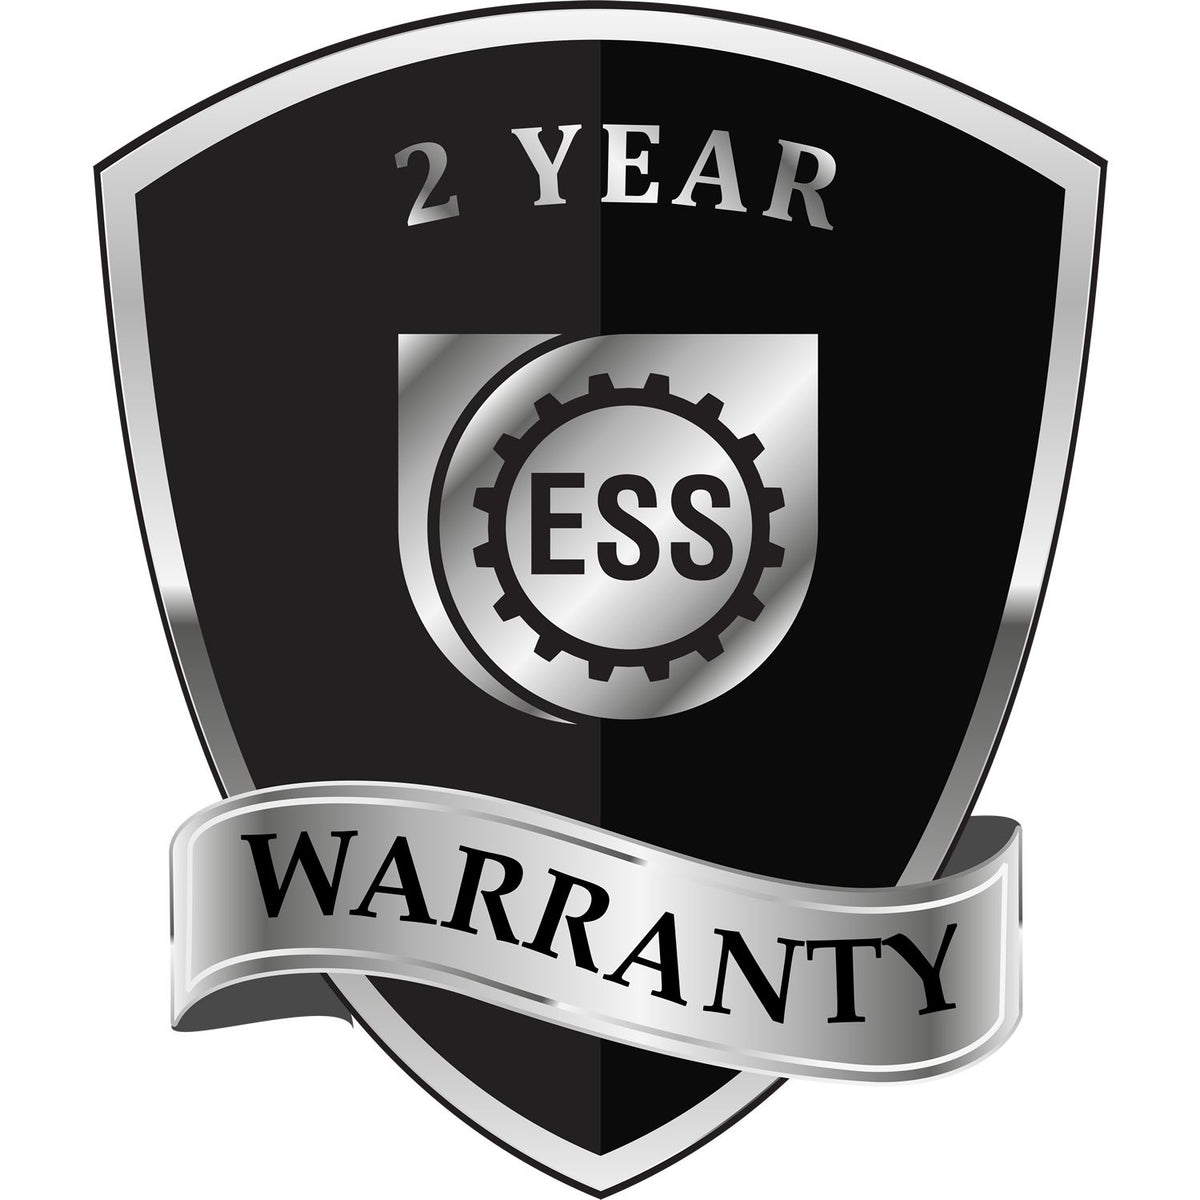 A badge or emblem showing a warranty icon for the Mississippi Engineer Desk Seal